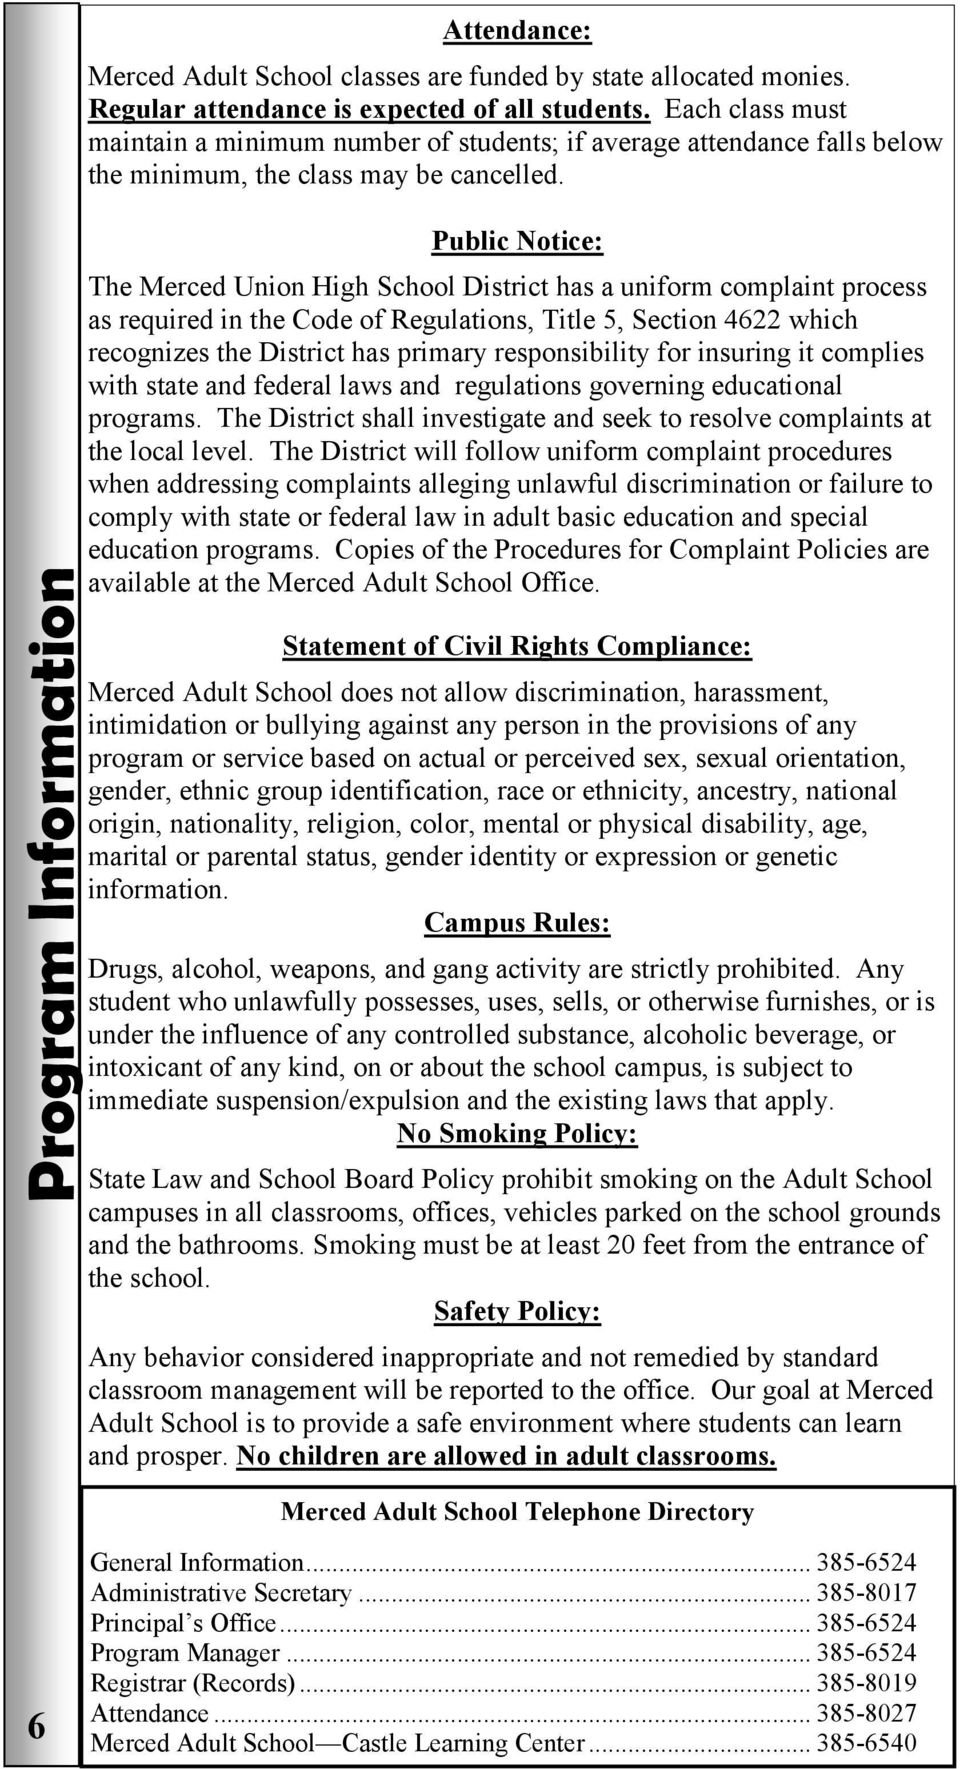 Public Notice: The Merced Union High School District has a uniform complaint process as required in the Code of Regulations, Title 5, Section 4622 which recognizes the District has primary